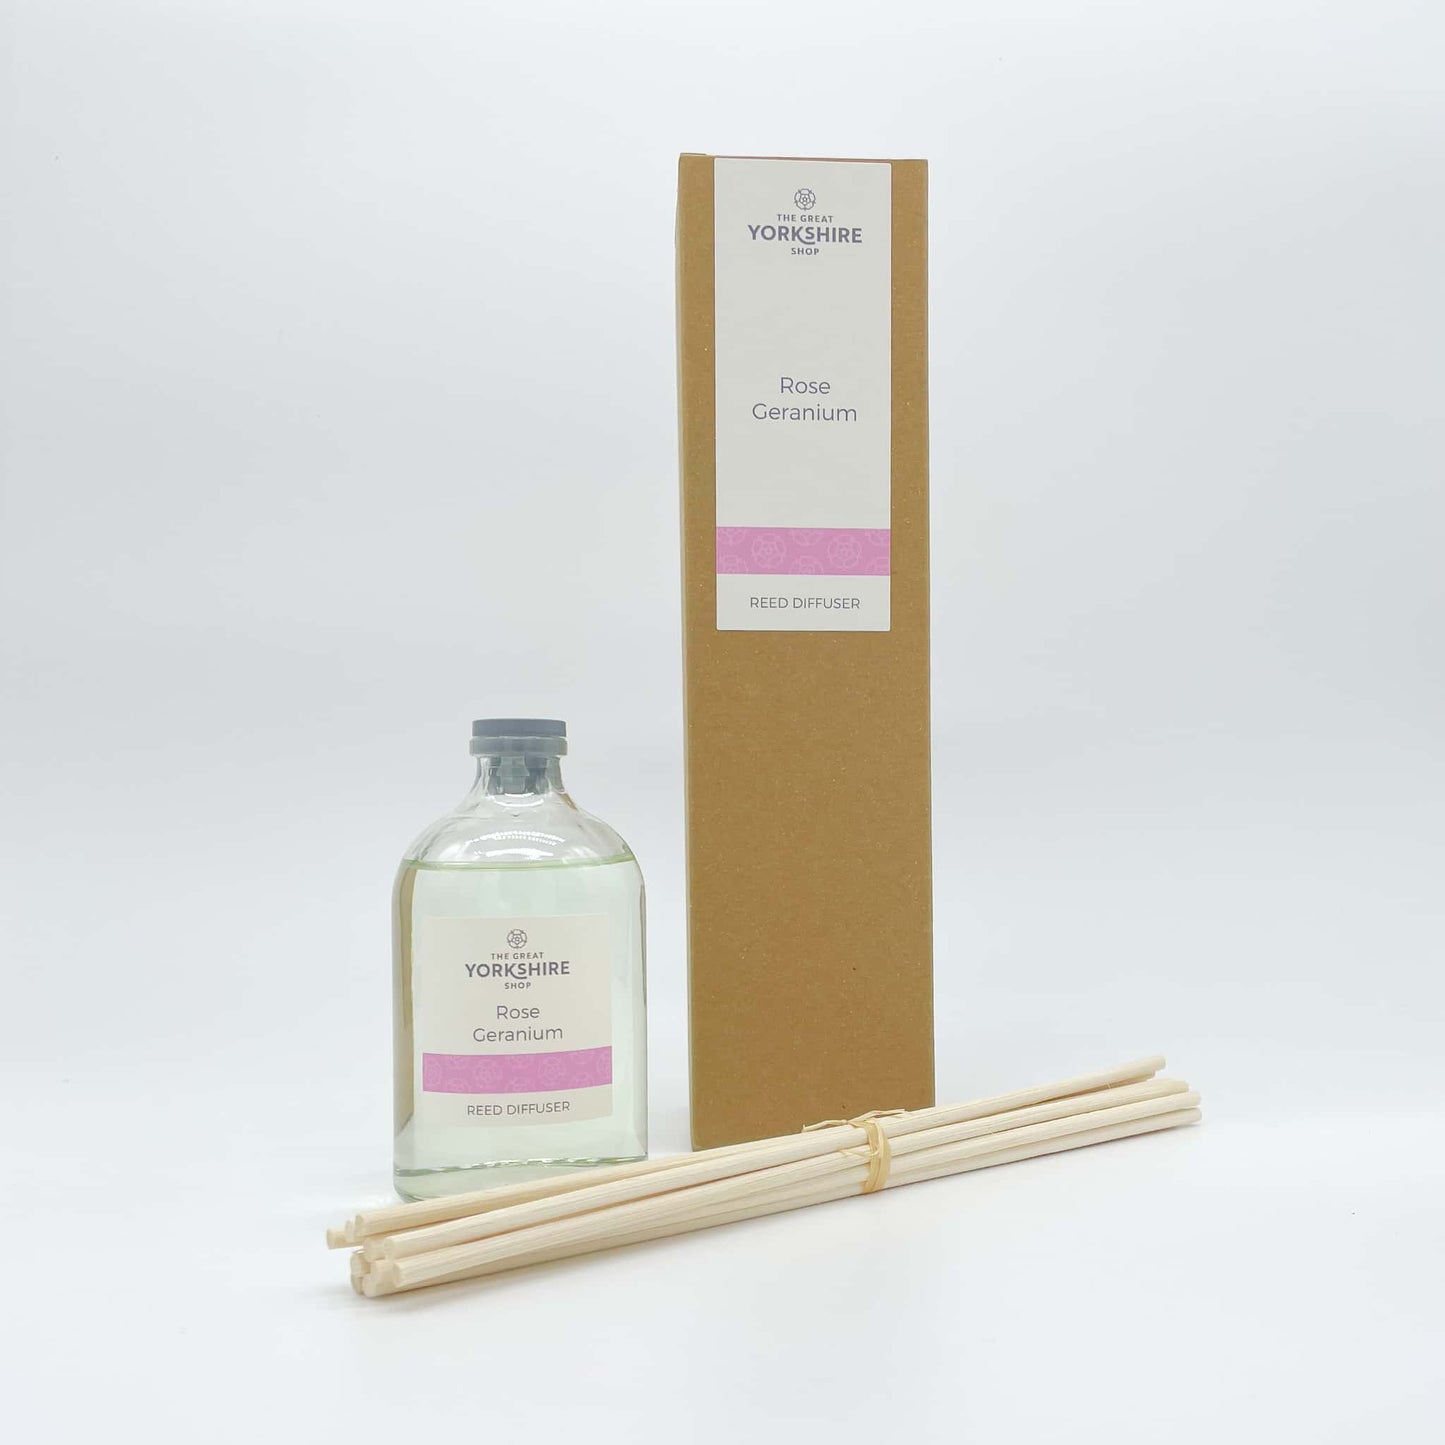 Rose Geranium Reed Diffuser - The Great Yorkshire Shop